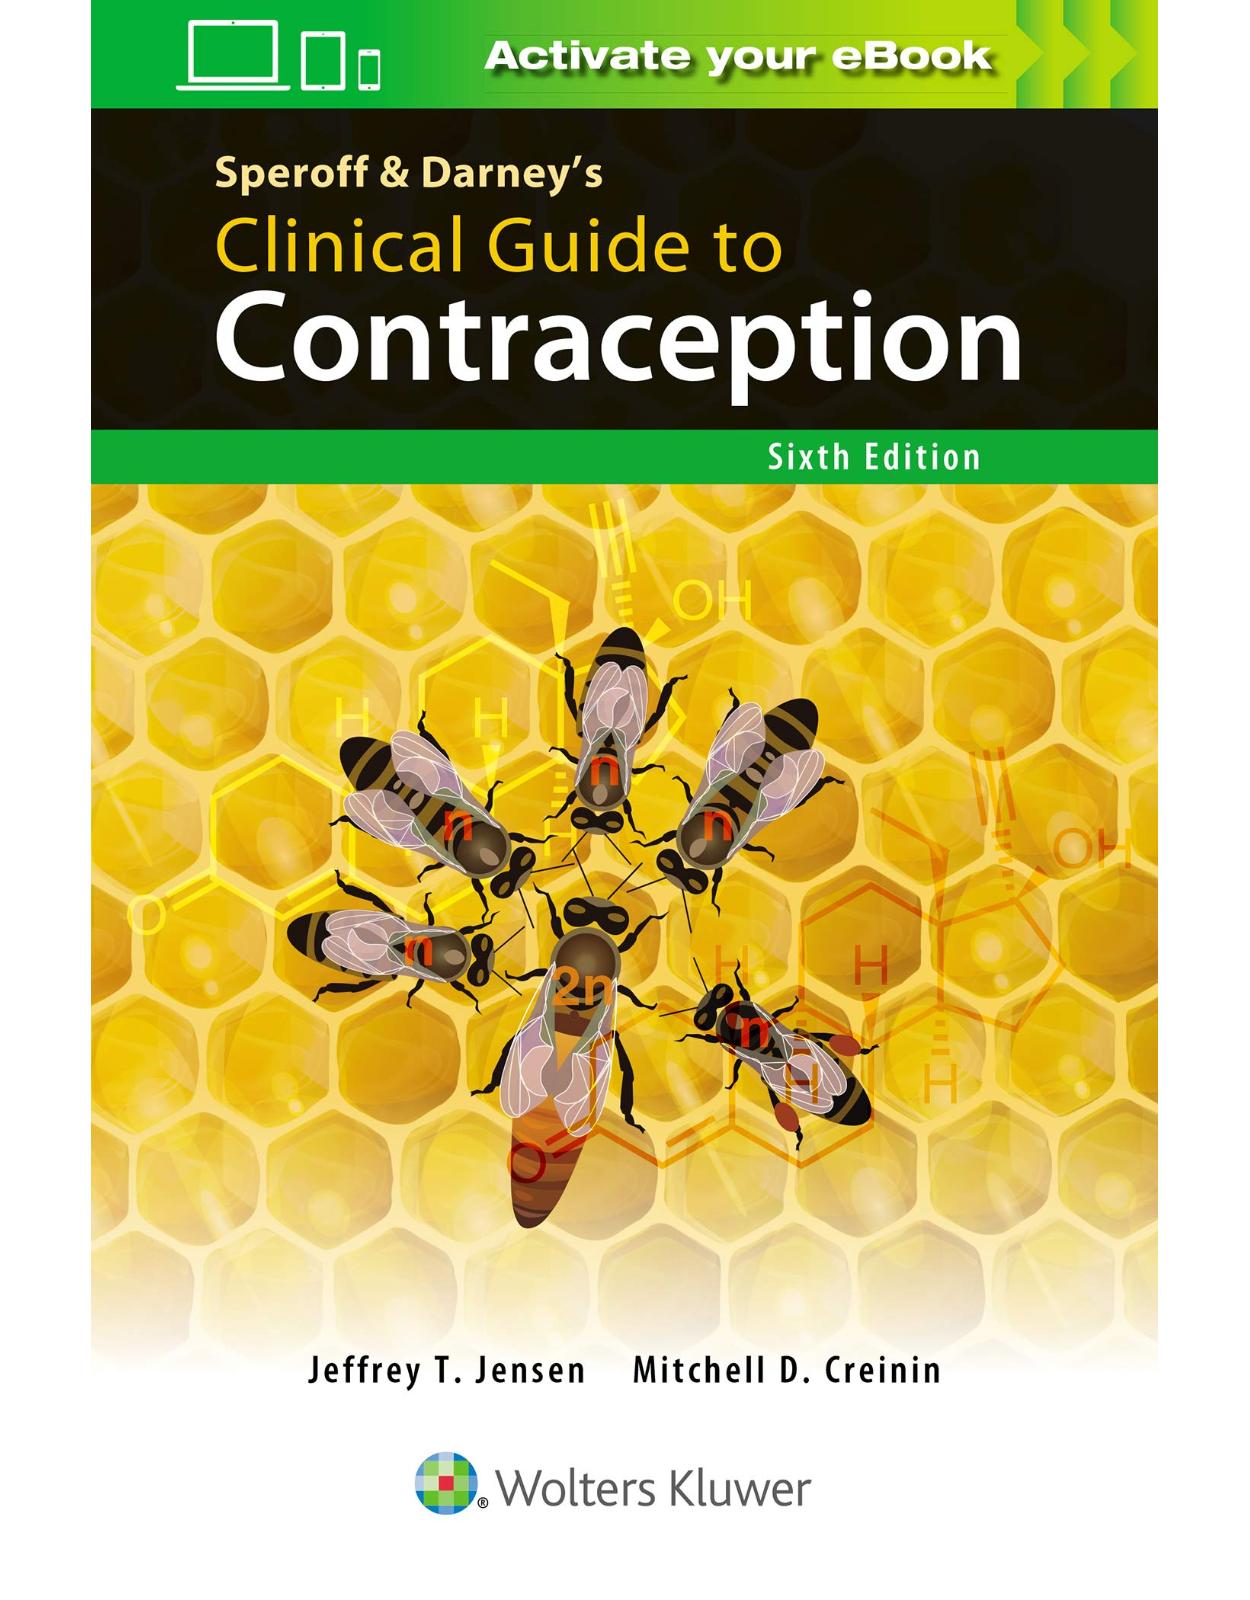 Speroff & Darney’s Clinical Guide to Contraception